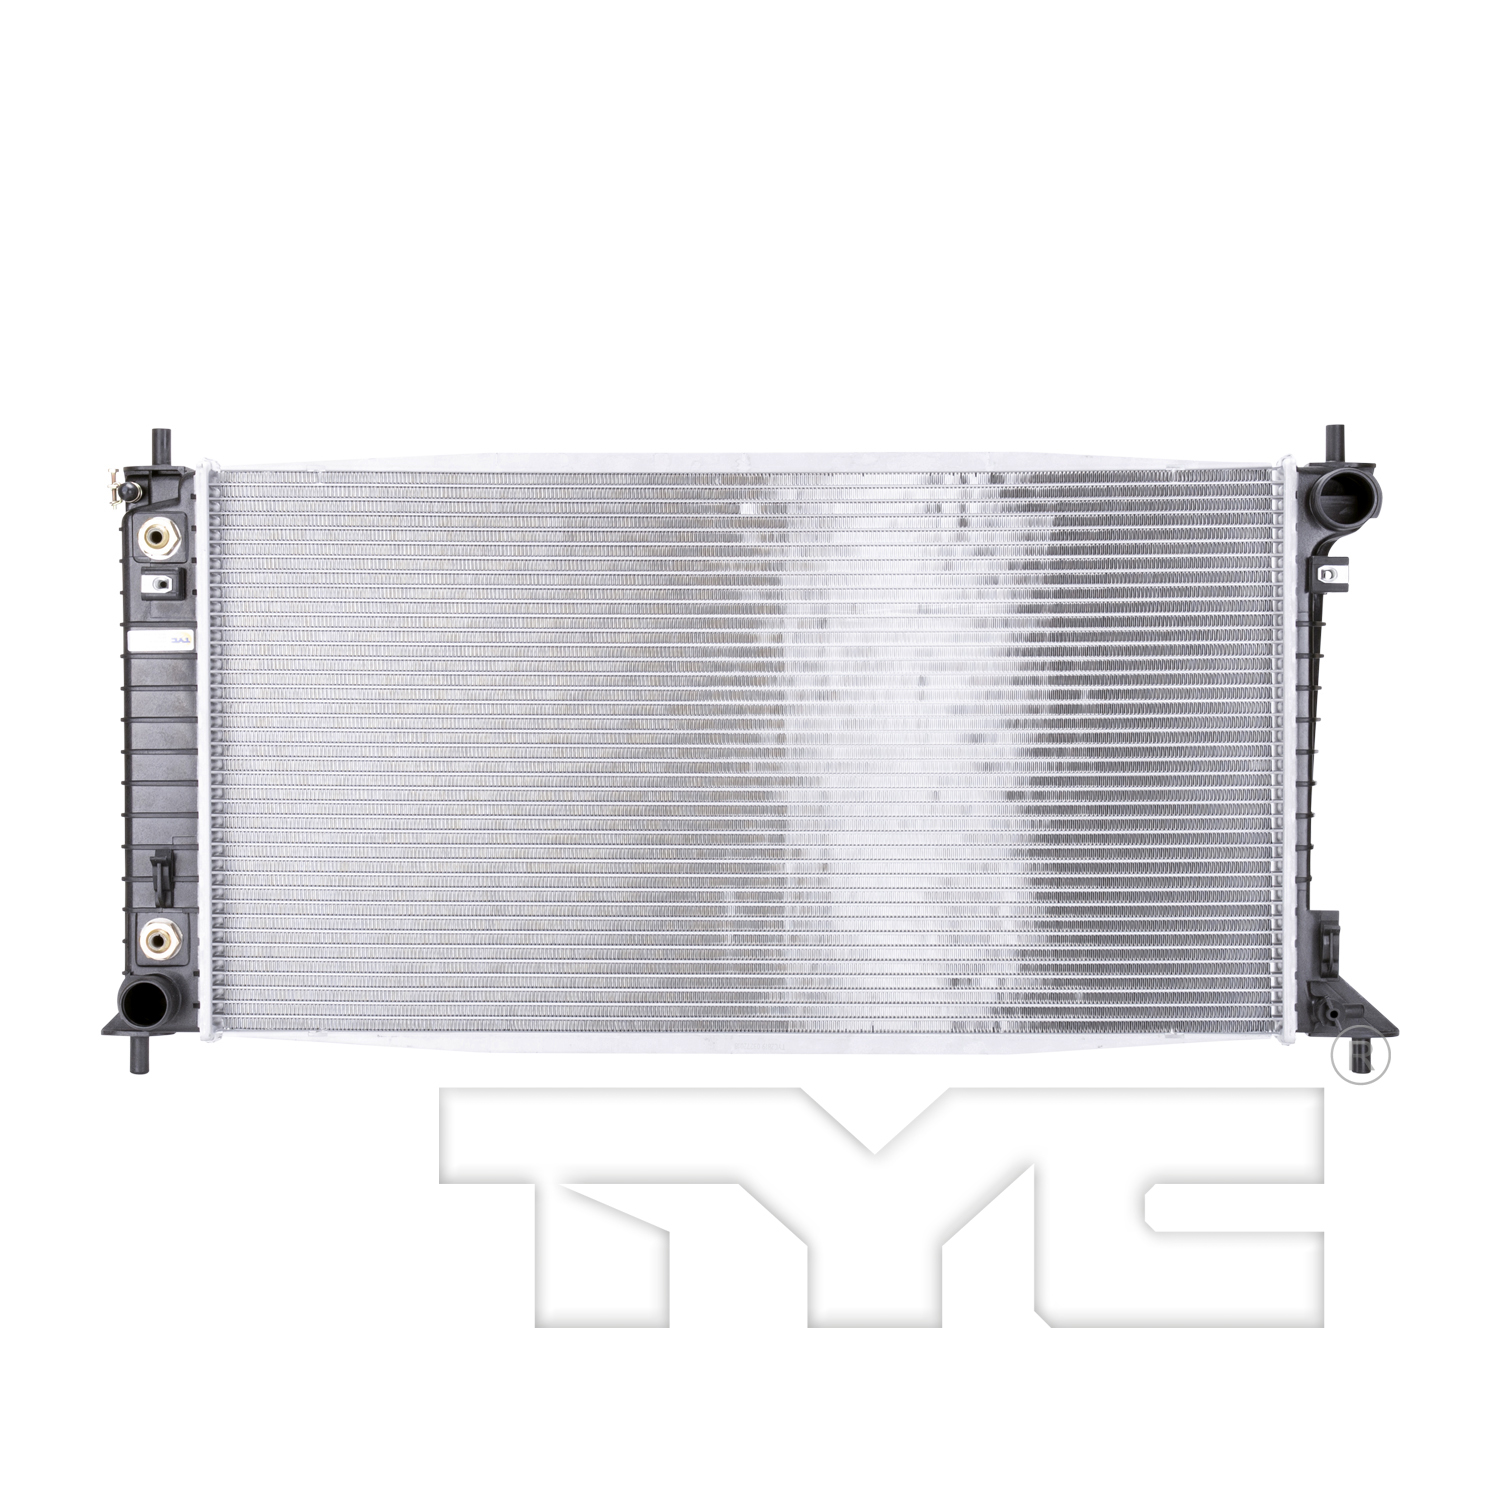 Aftermarket RADIATORS for FORD - F-150, F-150,05-06,Radiator assembly